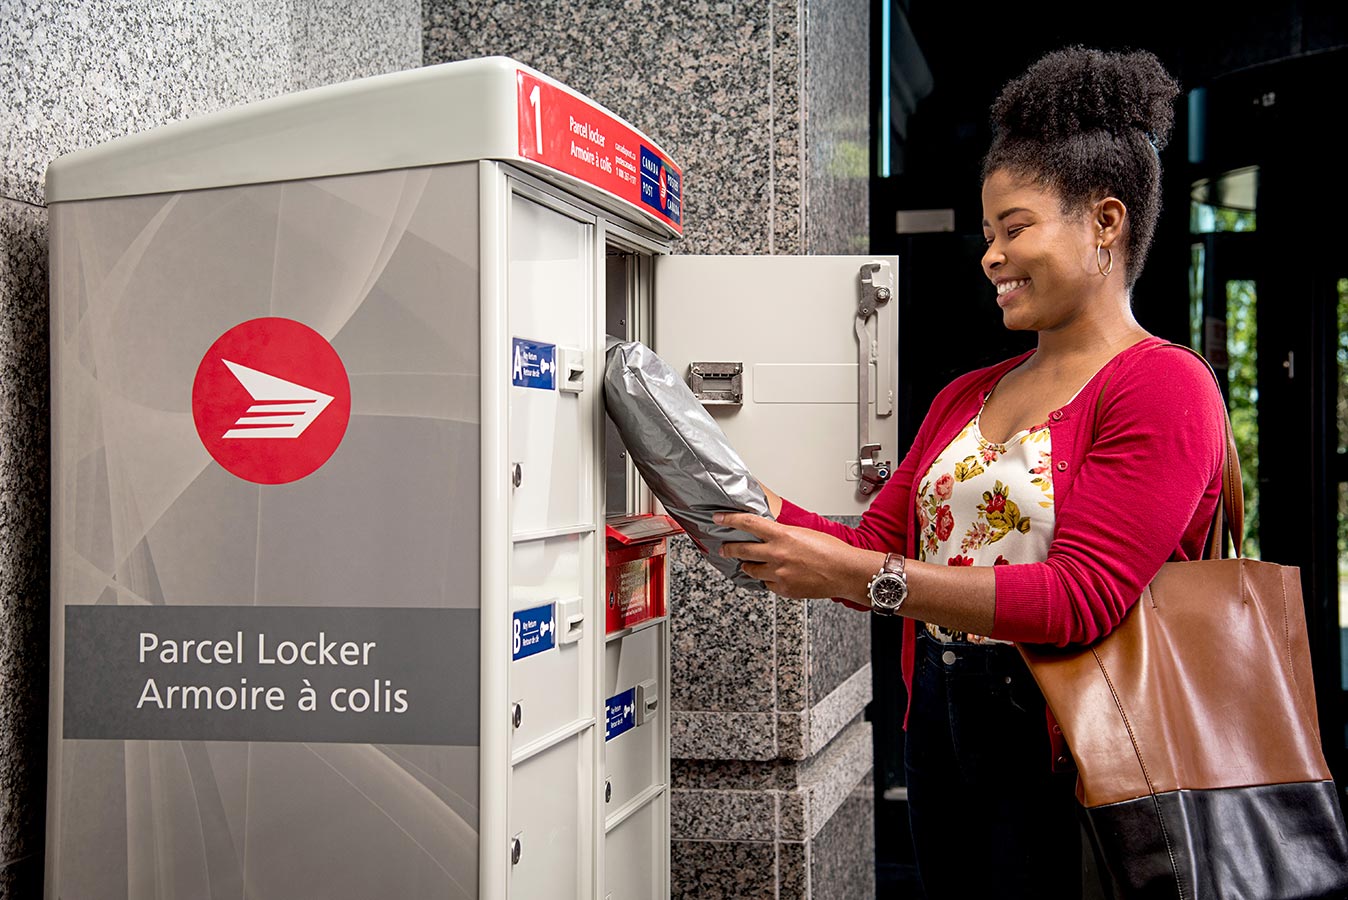 Woman picking up a package from a Canada Post parcel locker in her building